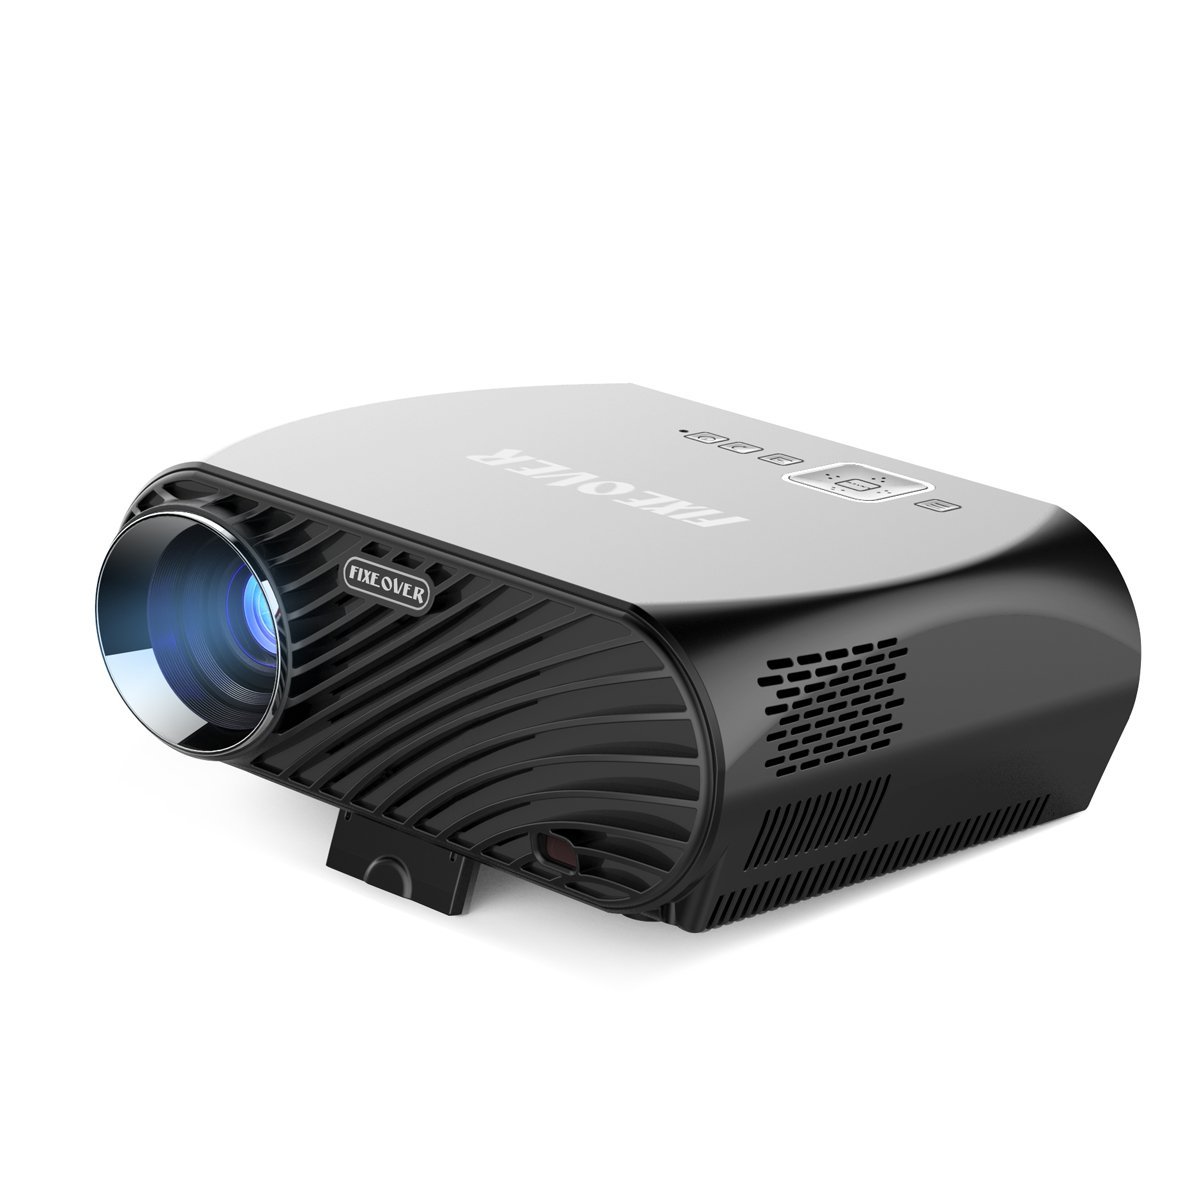 FixeOver GP100 Projector HD Ready 1280x800Pixels for Your Digital Home Theater, 3500 Lumens LED Light & 30000 Hours of Video Entertainment, Office File Read by HDMI